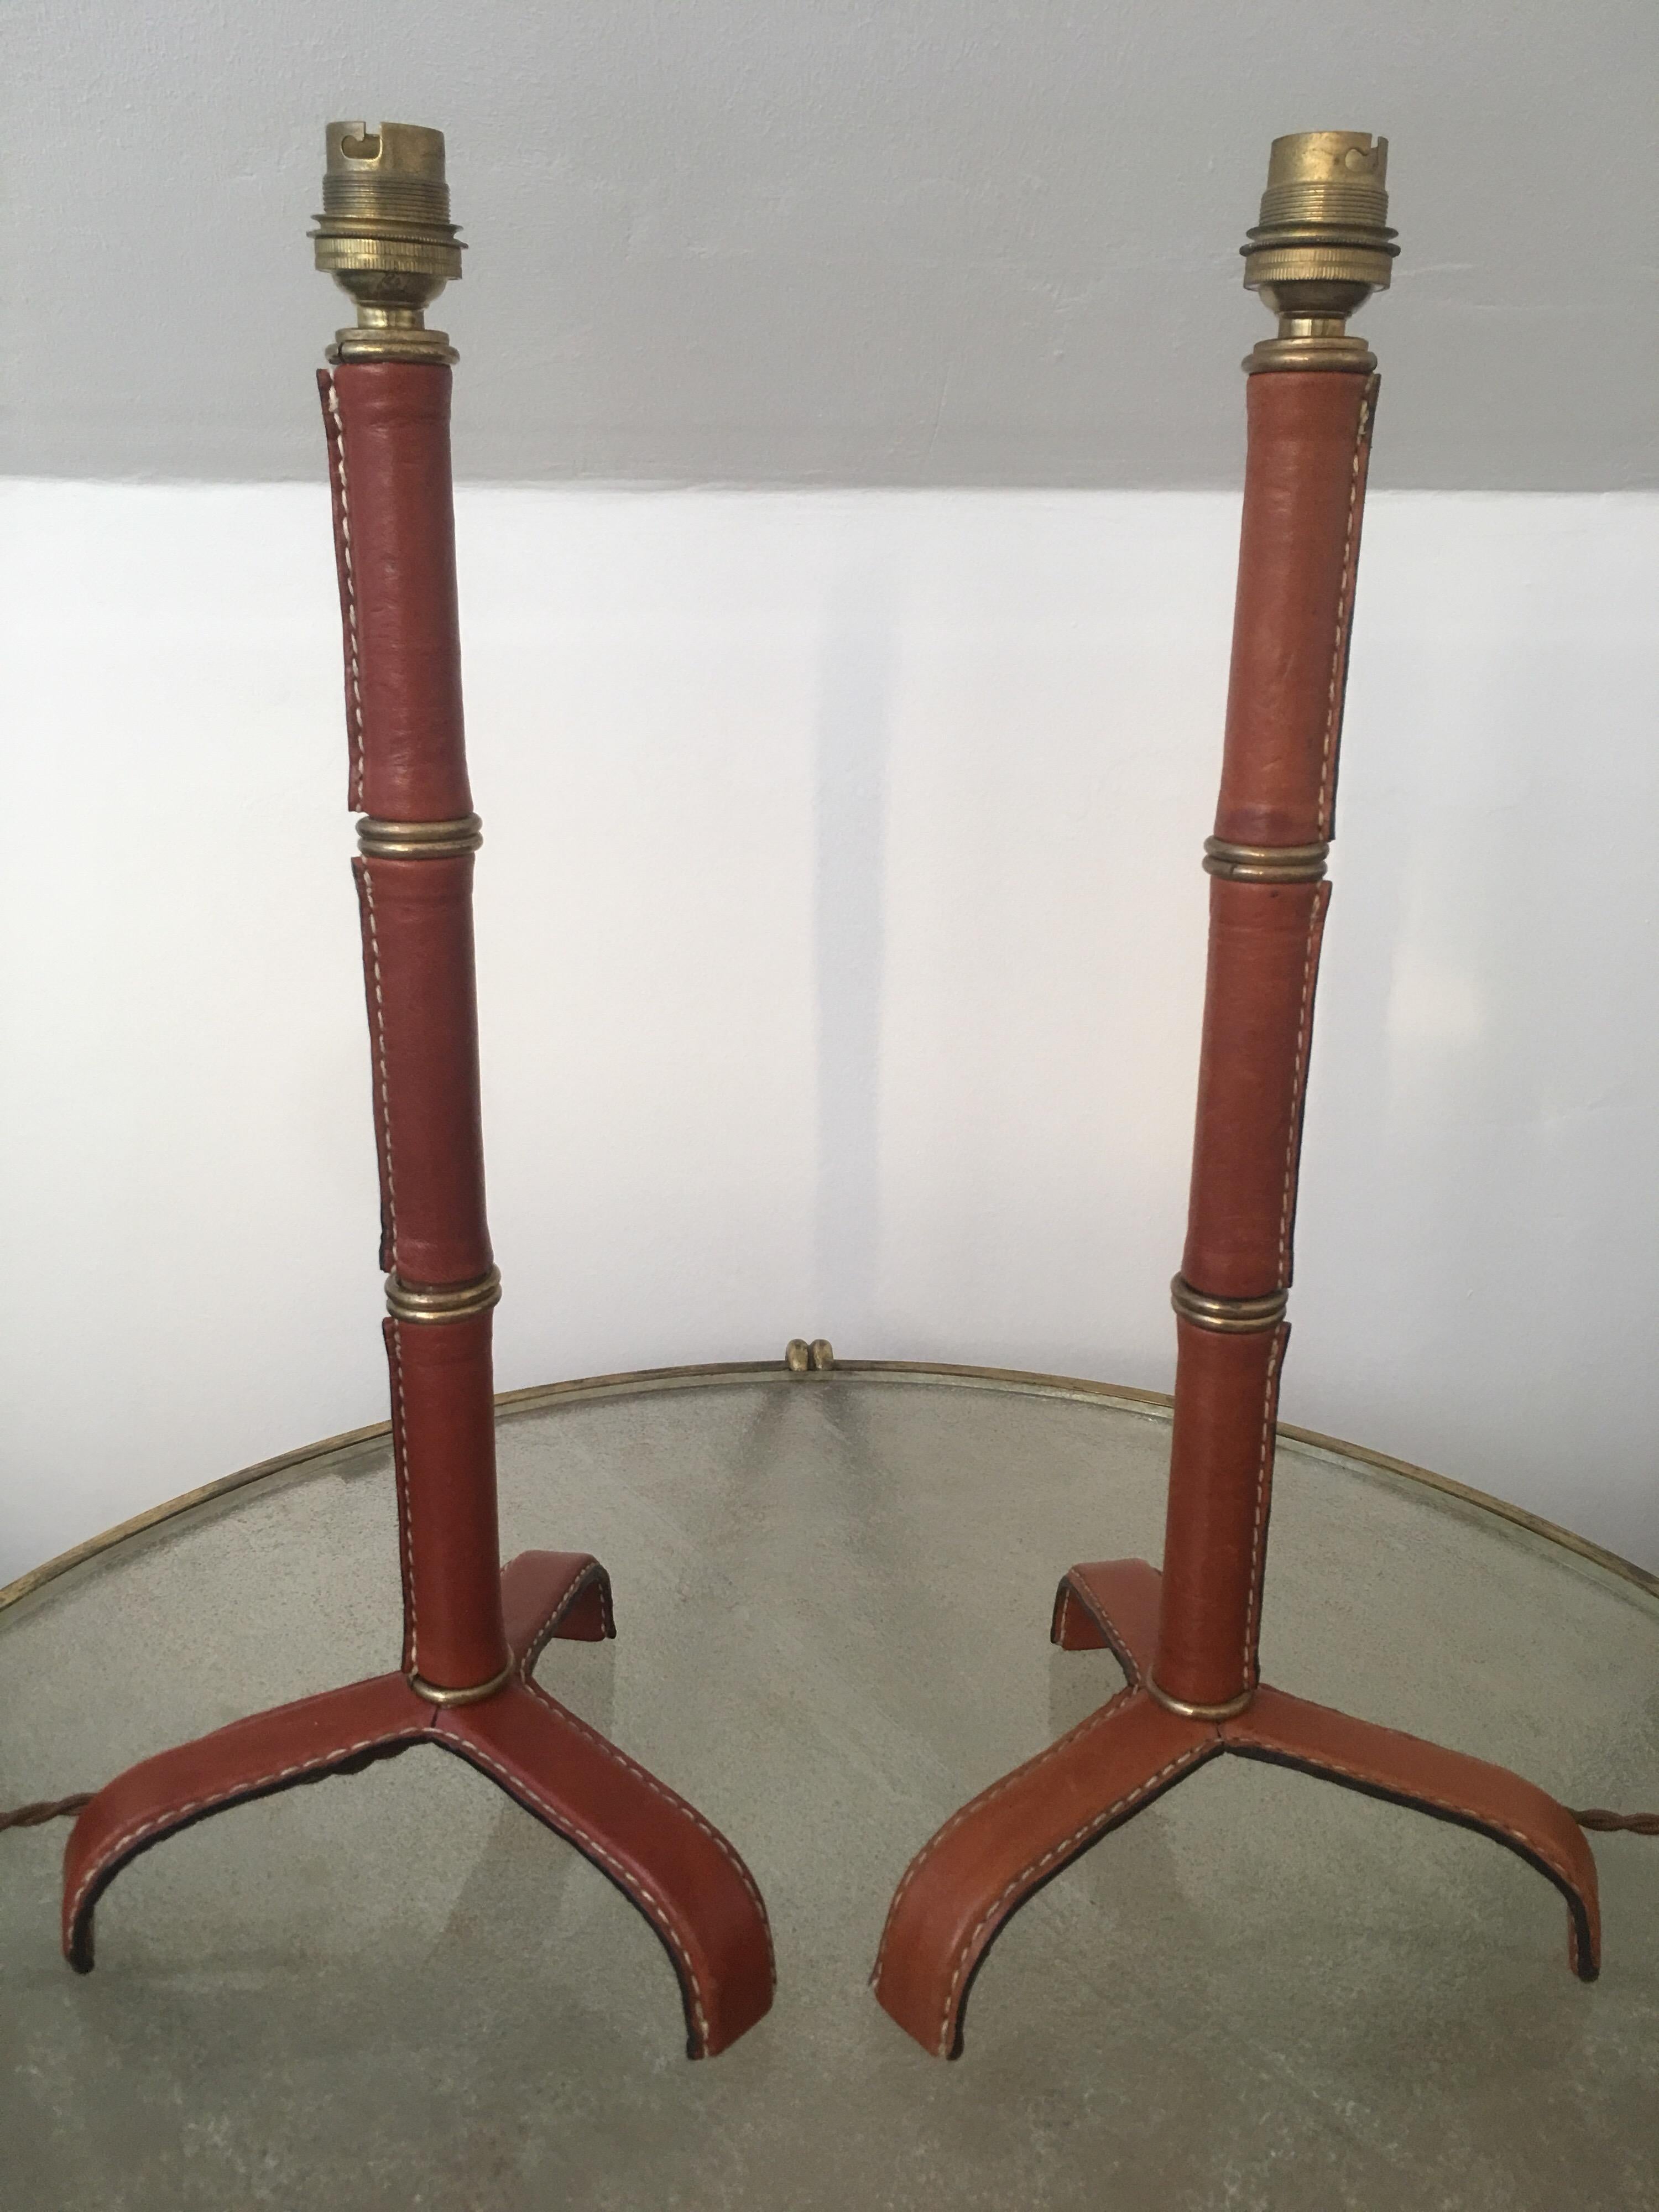 A pair of handstitched leather table lamps designed by Jacques Adnet in France in 1950s.
Bamboo form with handstitched leather and brass rings are characteristic of the Jacques Adnet's work.
French bayonet socket, bakelite switch and new